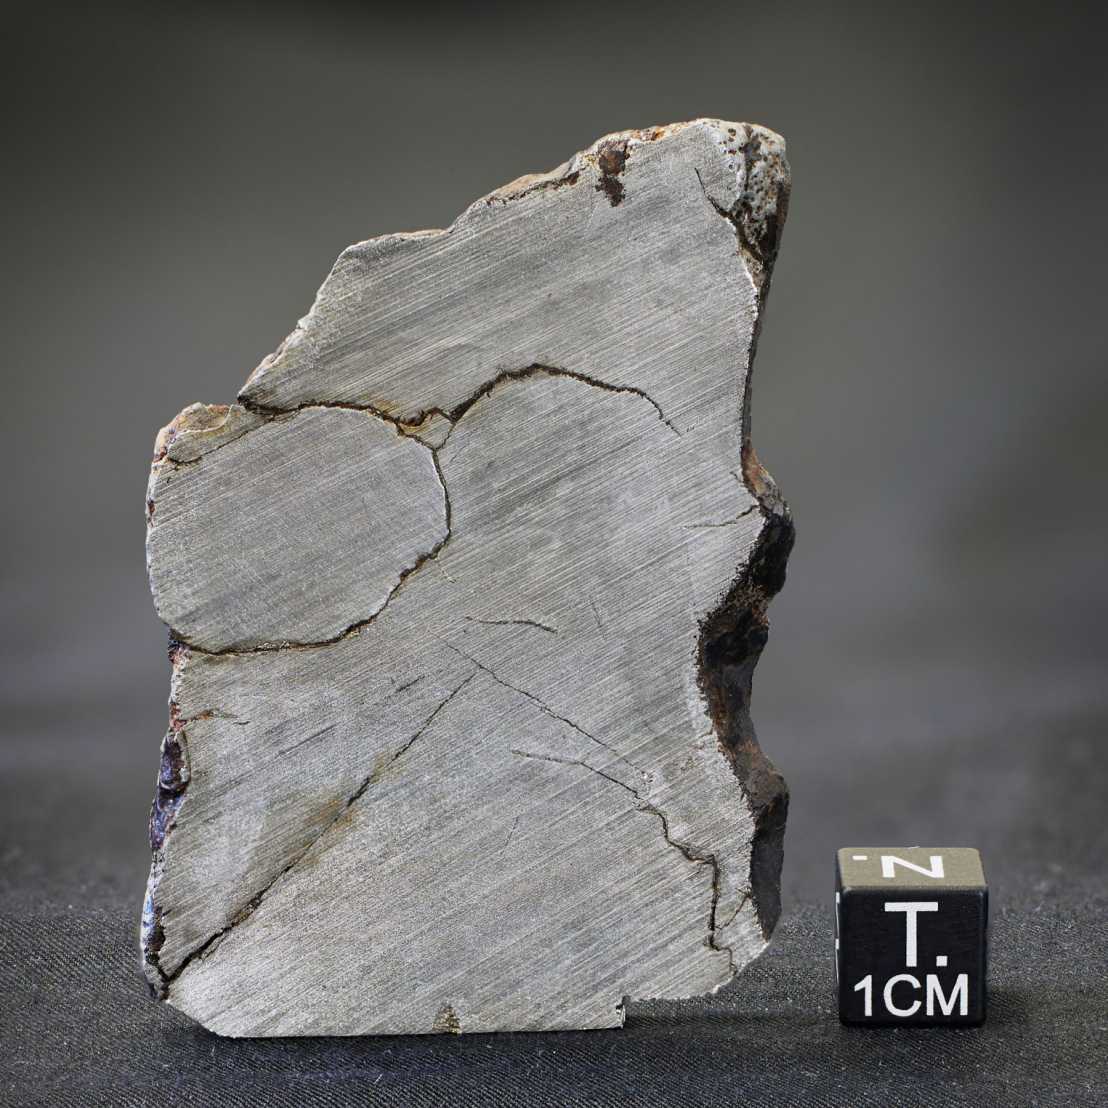 Enlarged view: One of the iron meteorite samples the team analysed